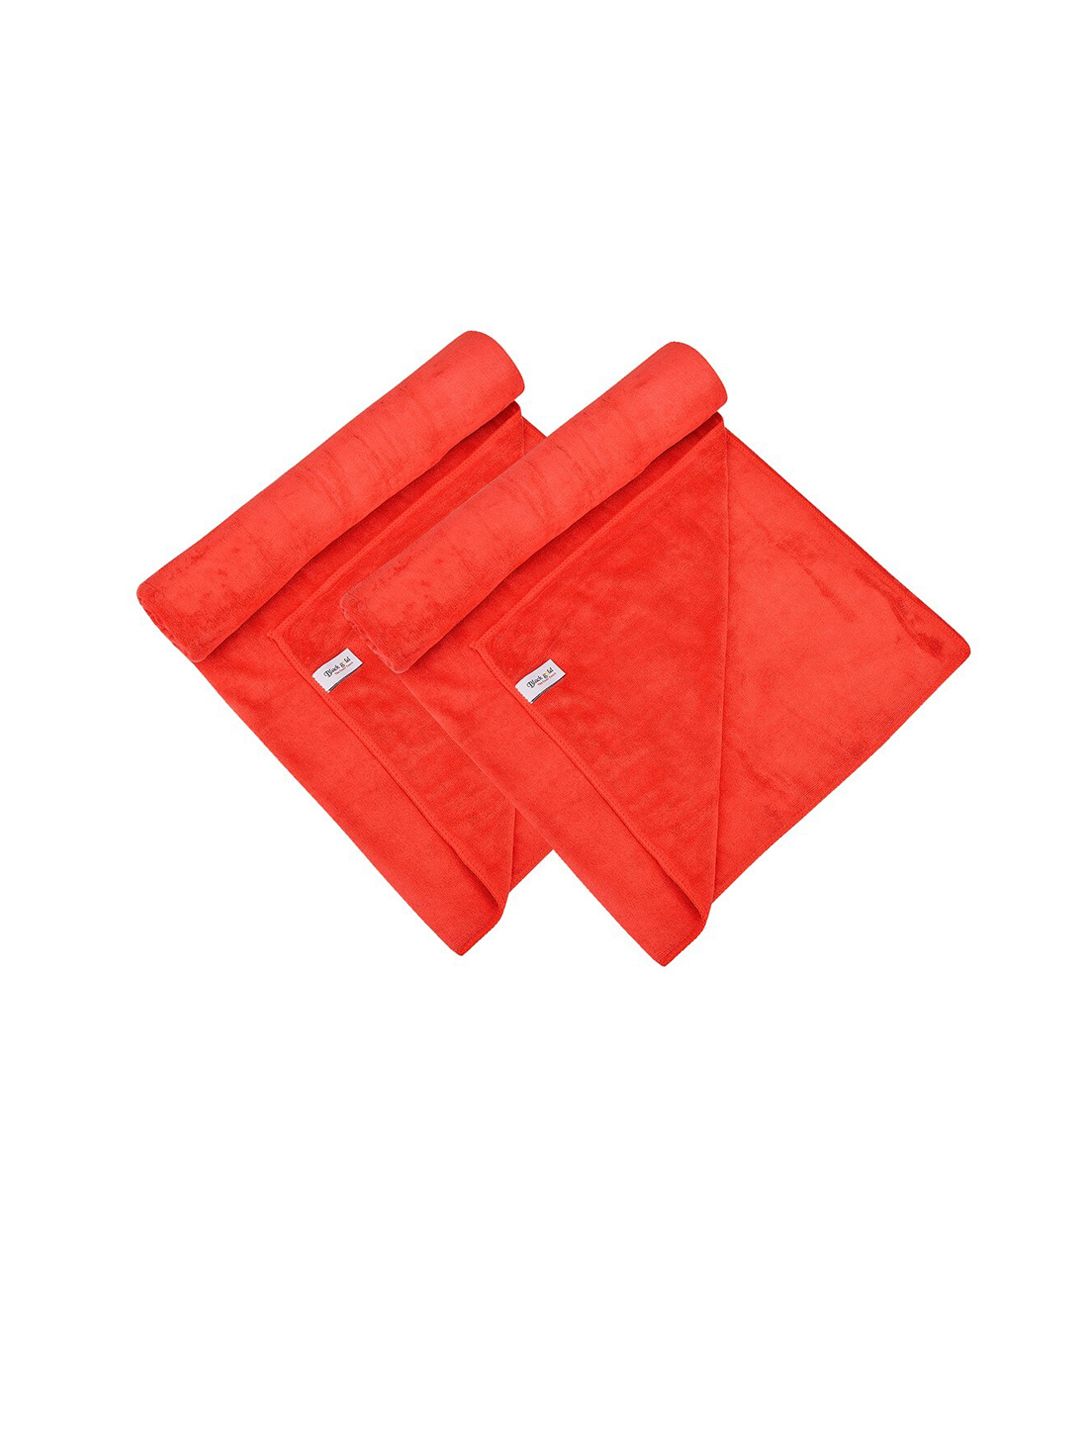 Black Gold Set Of 2 Red Solid 400 GSM Bath Towels Price in India